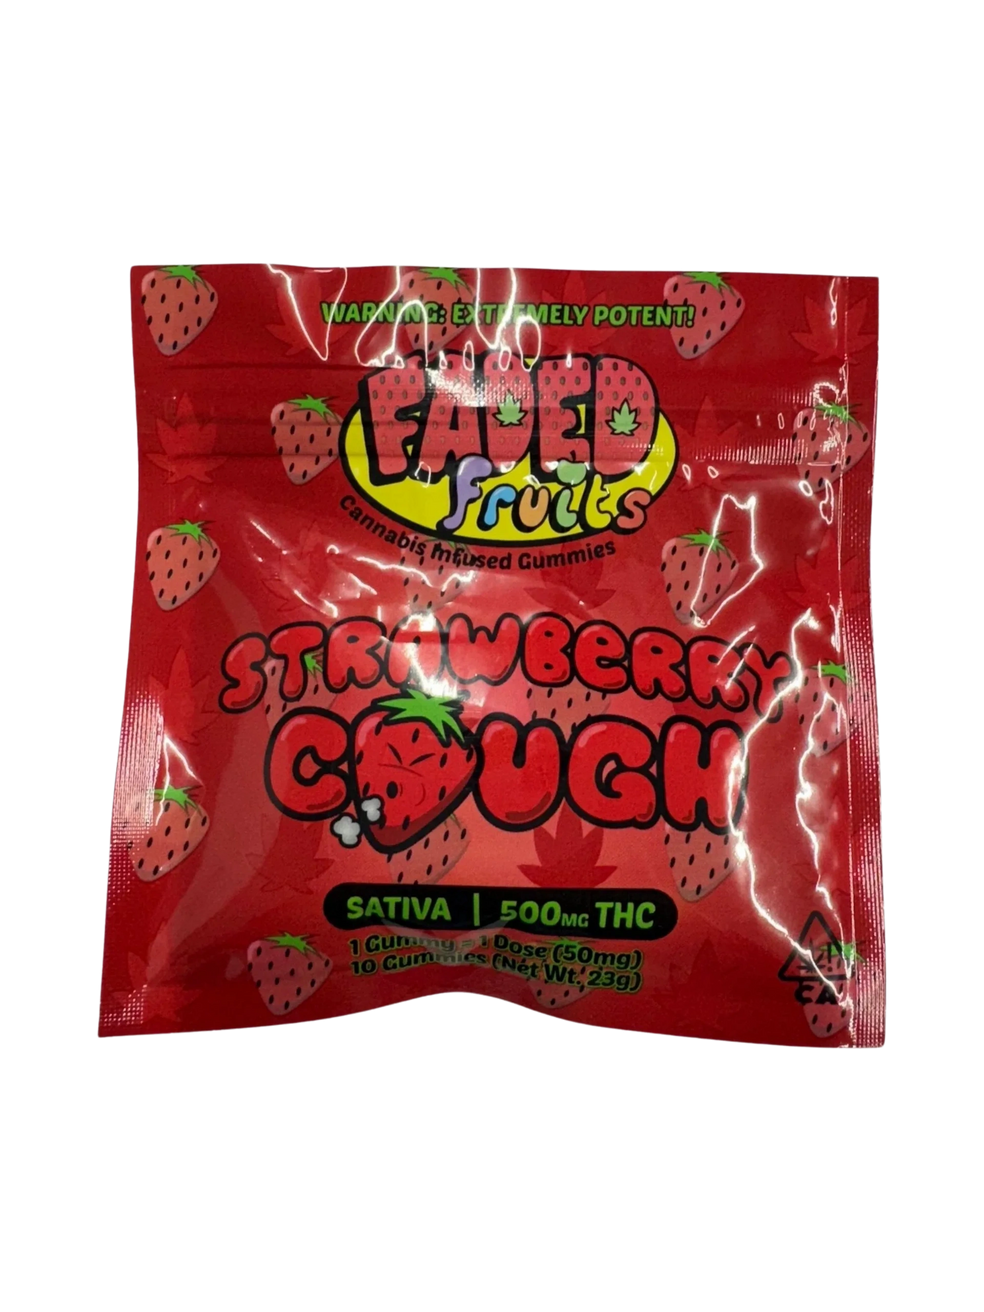 Faded Fruit Gummies (500mg) | Sativa | Strawberry Cough